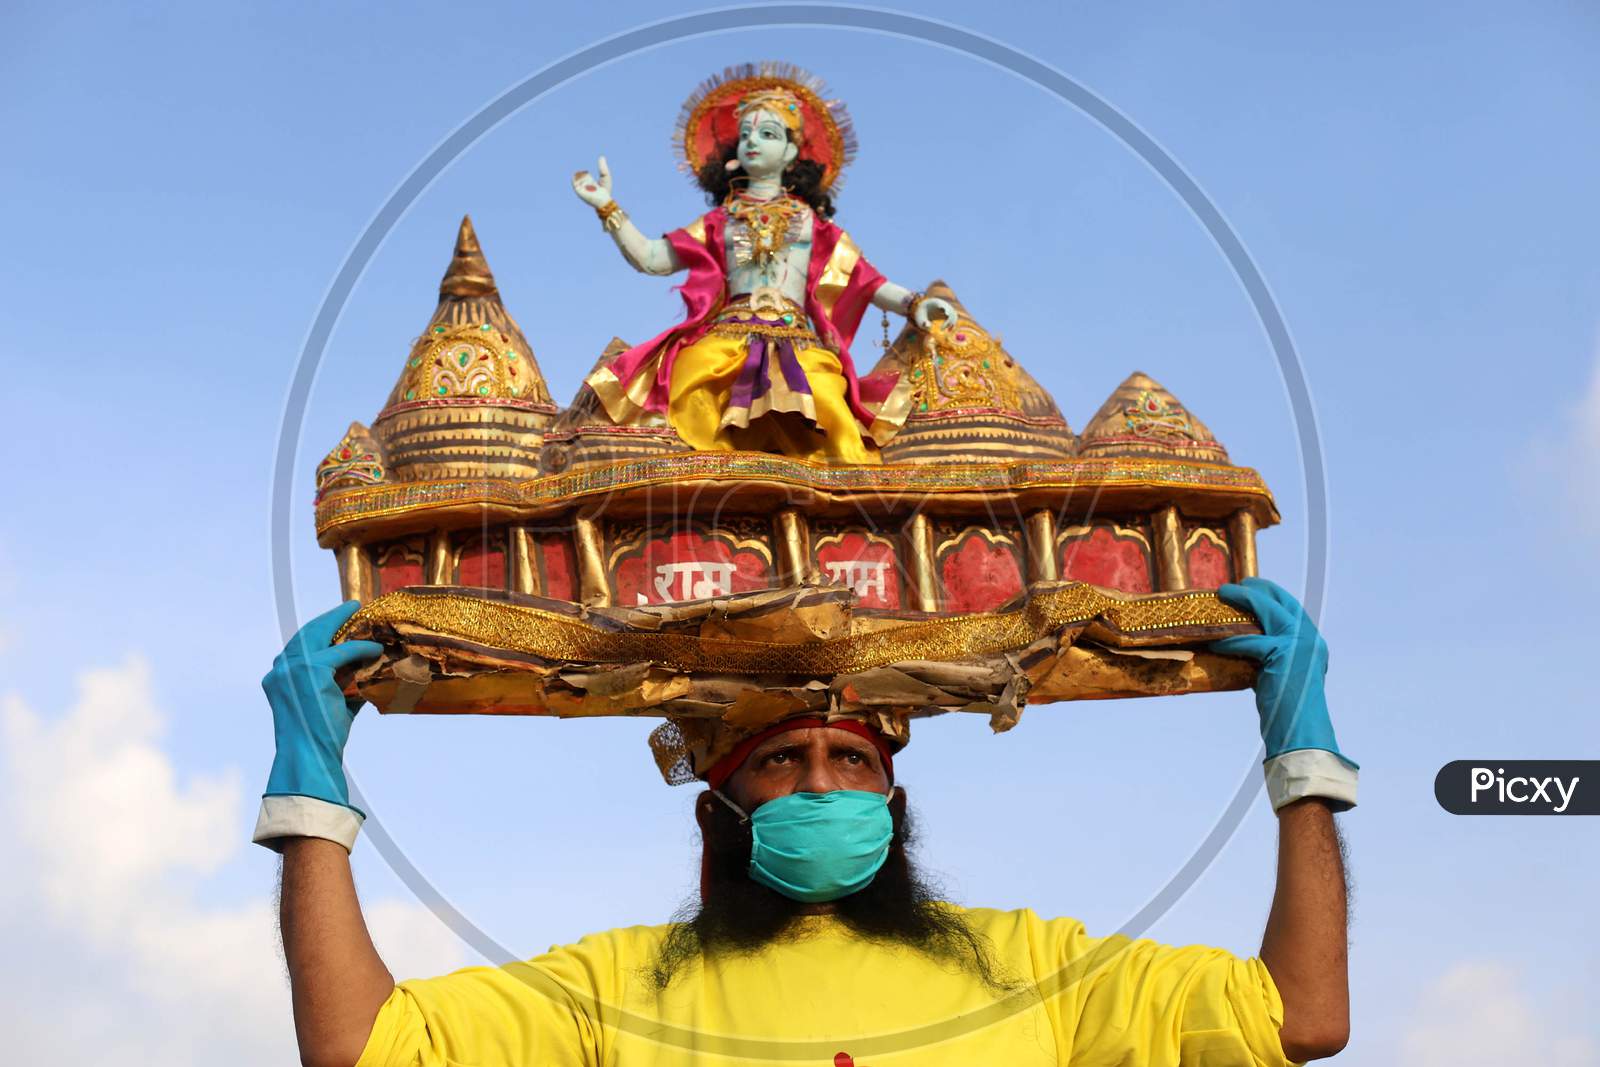 A man holds sculpture of Ram Temple, ahead of the foundation ceremony of Ram temple in Ayodhya, on the banks of River Ganga at Sangam, in Prayagraj, August 4, 2020.